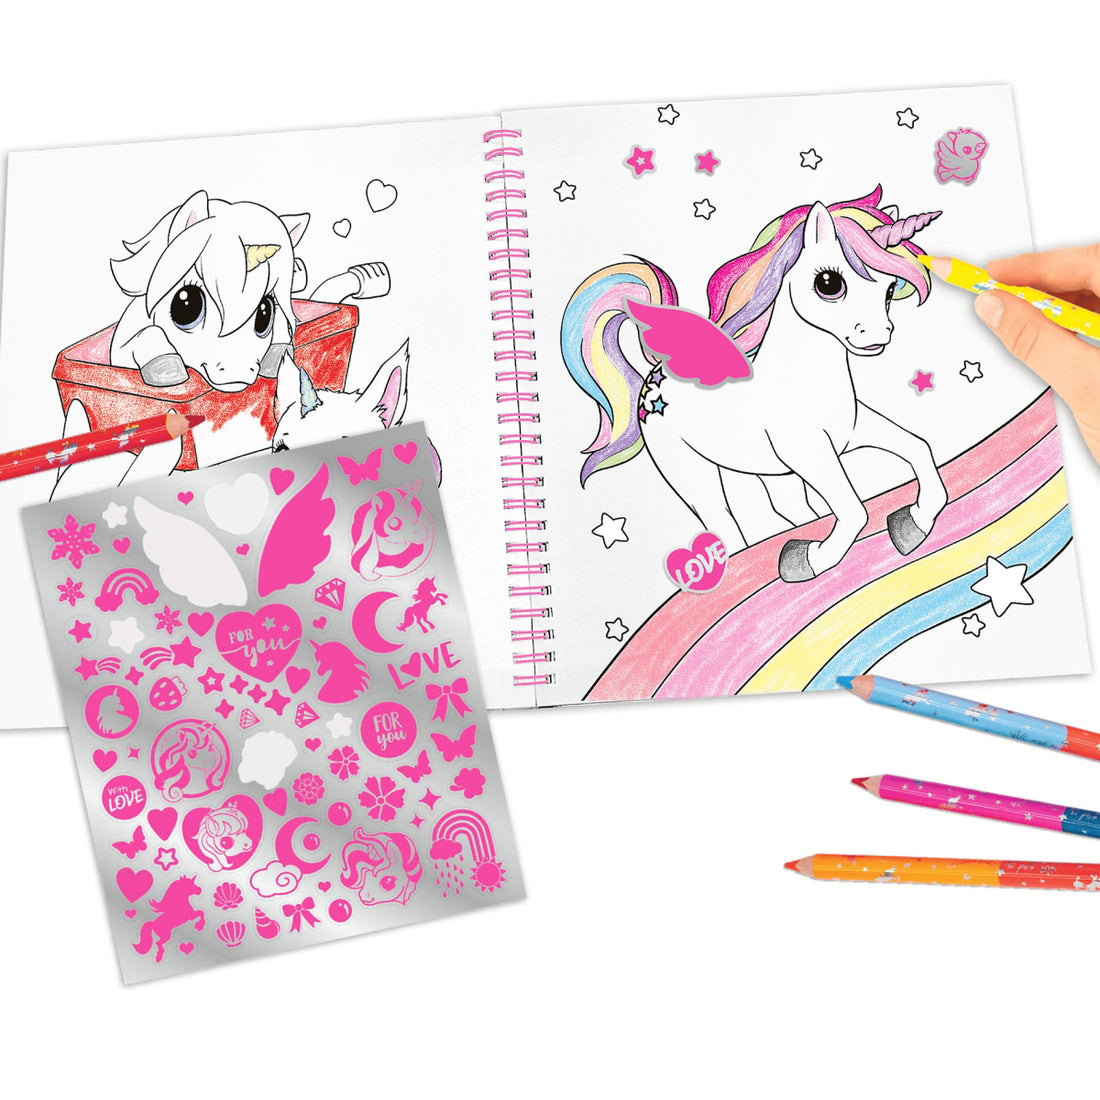 depesche-ylvi-colouring-book-with-unicorn-and-sequins-depe-0012492